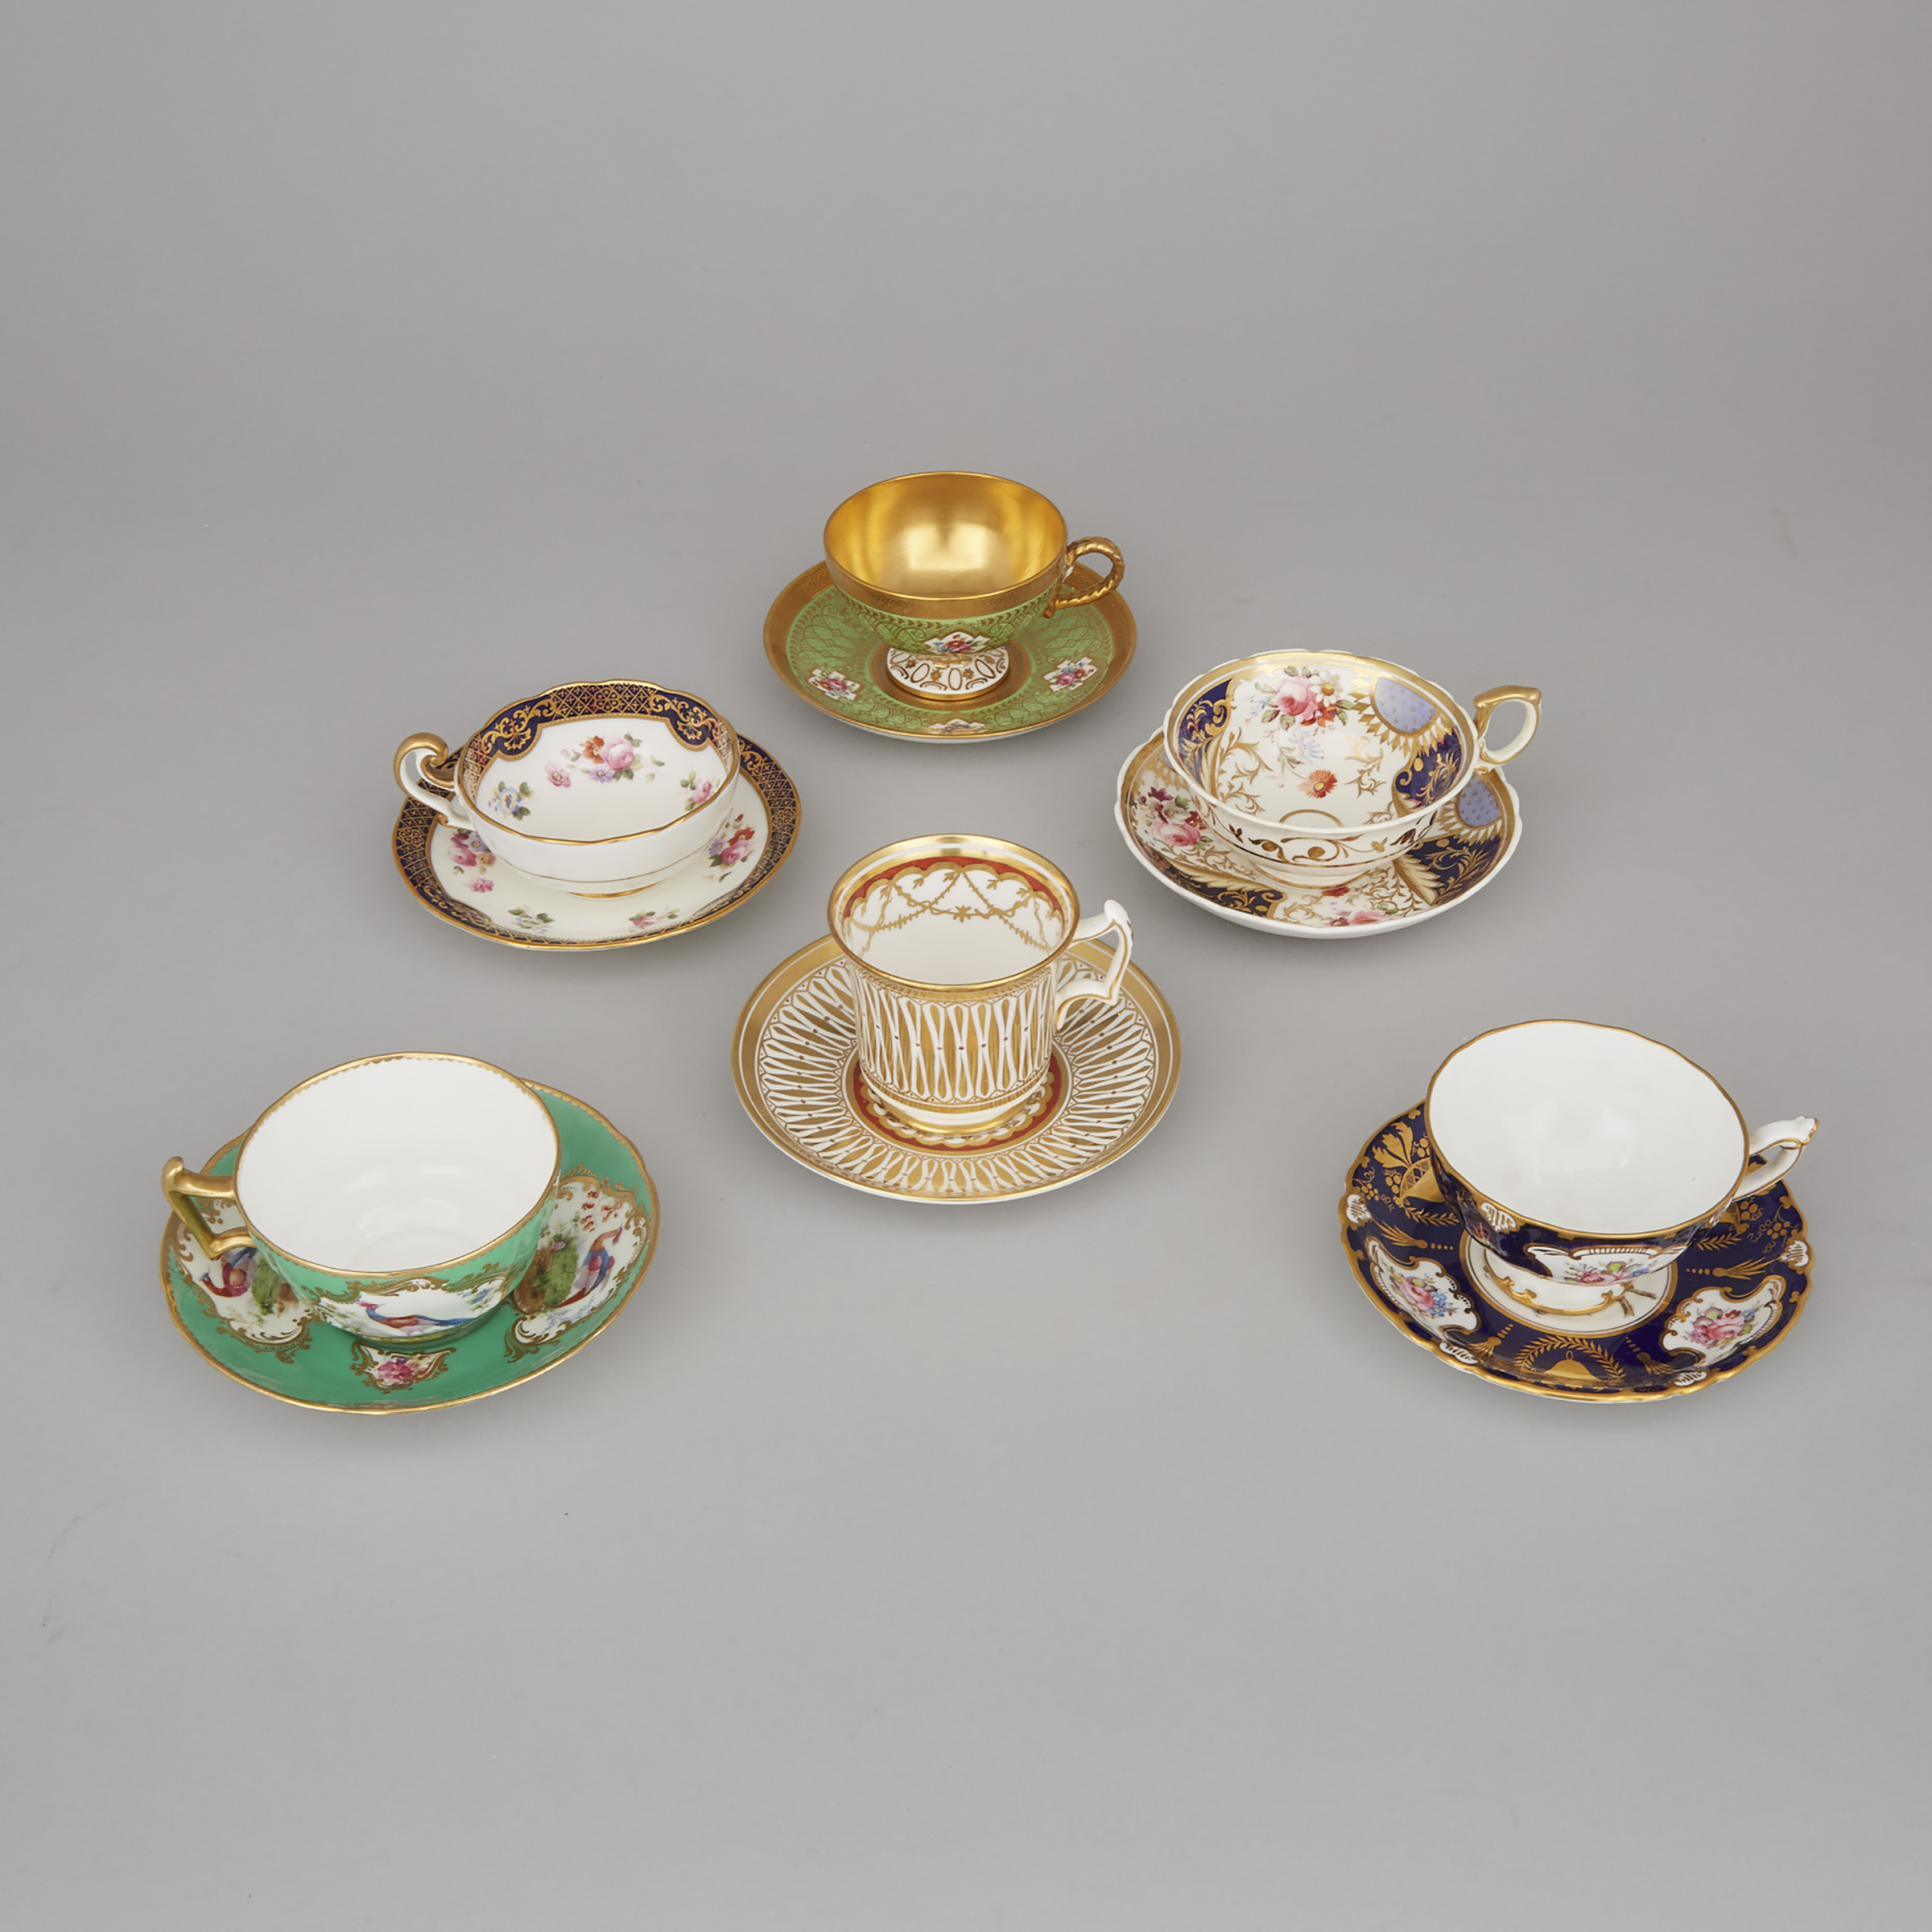 Six Various Royal Crown Derby, Cauldon, Royal Doulton, Hammersley, and Royal Chelsea Tea Cups and Saucers, 20th century